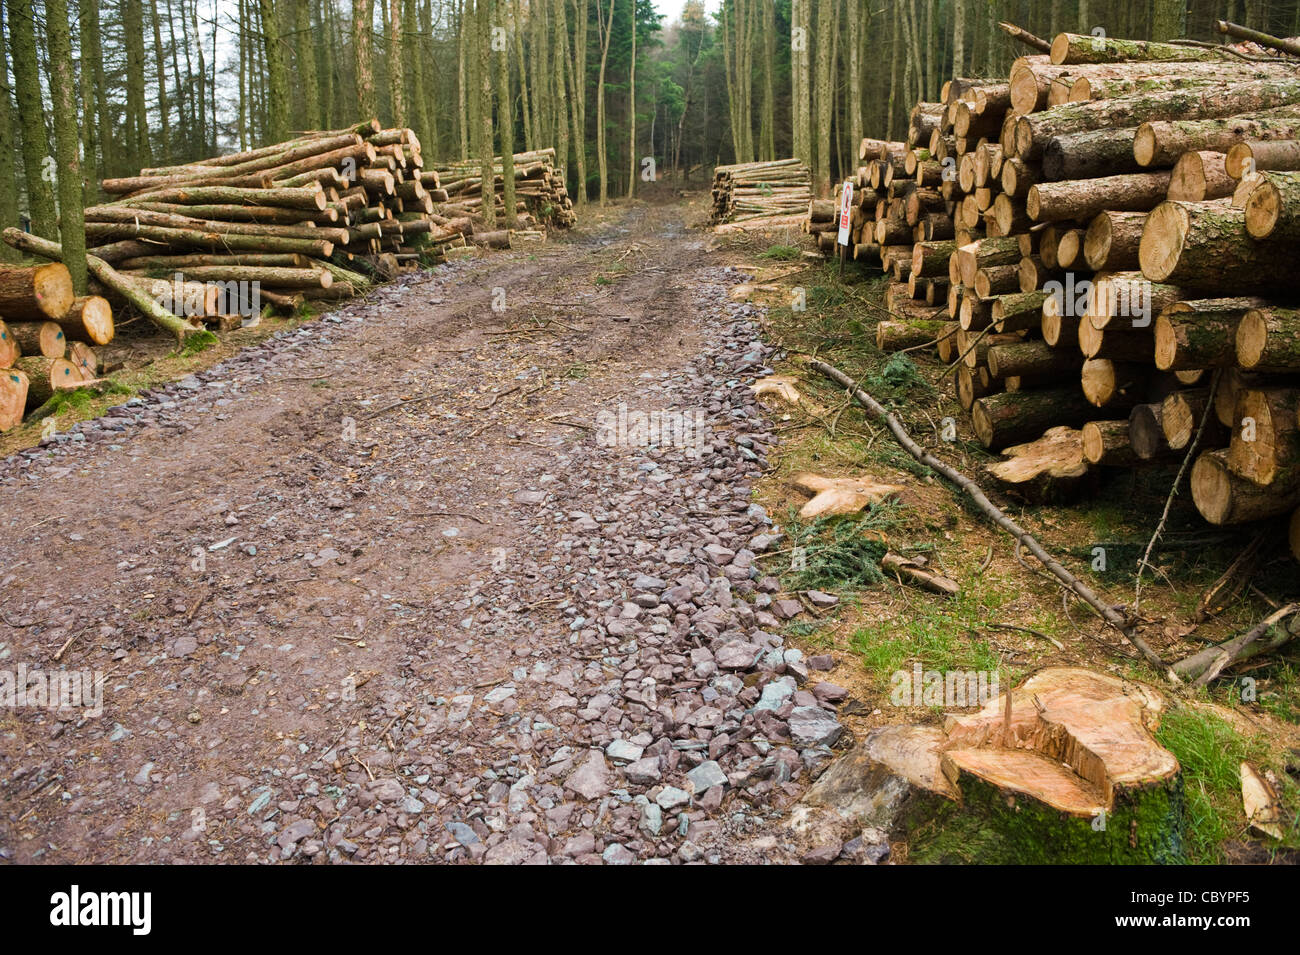 Woodland tree felling in the Brecon Beacons National Park to prevent spread of larch conifer disease Phytophthora ramorum Stock Photo